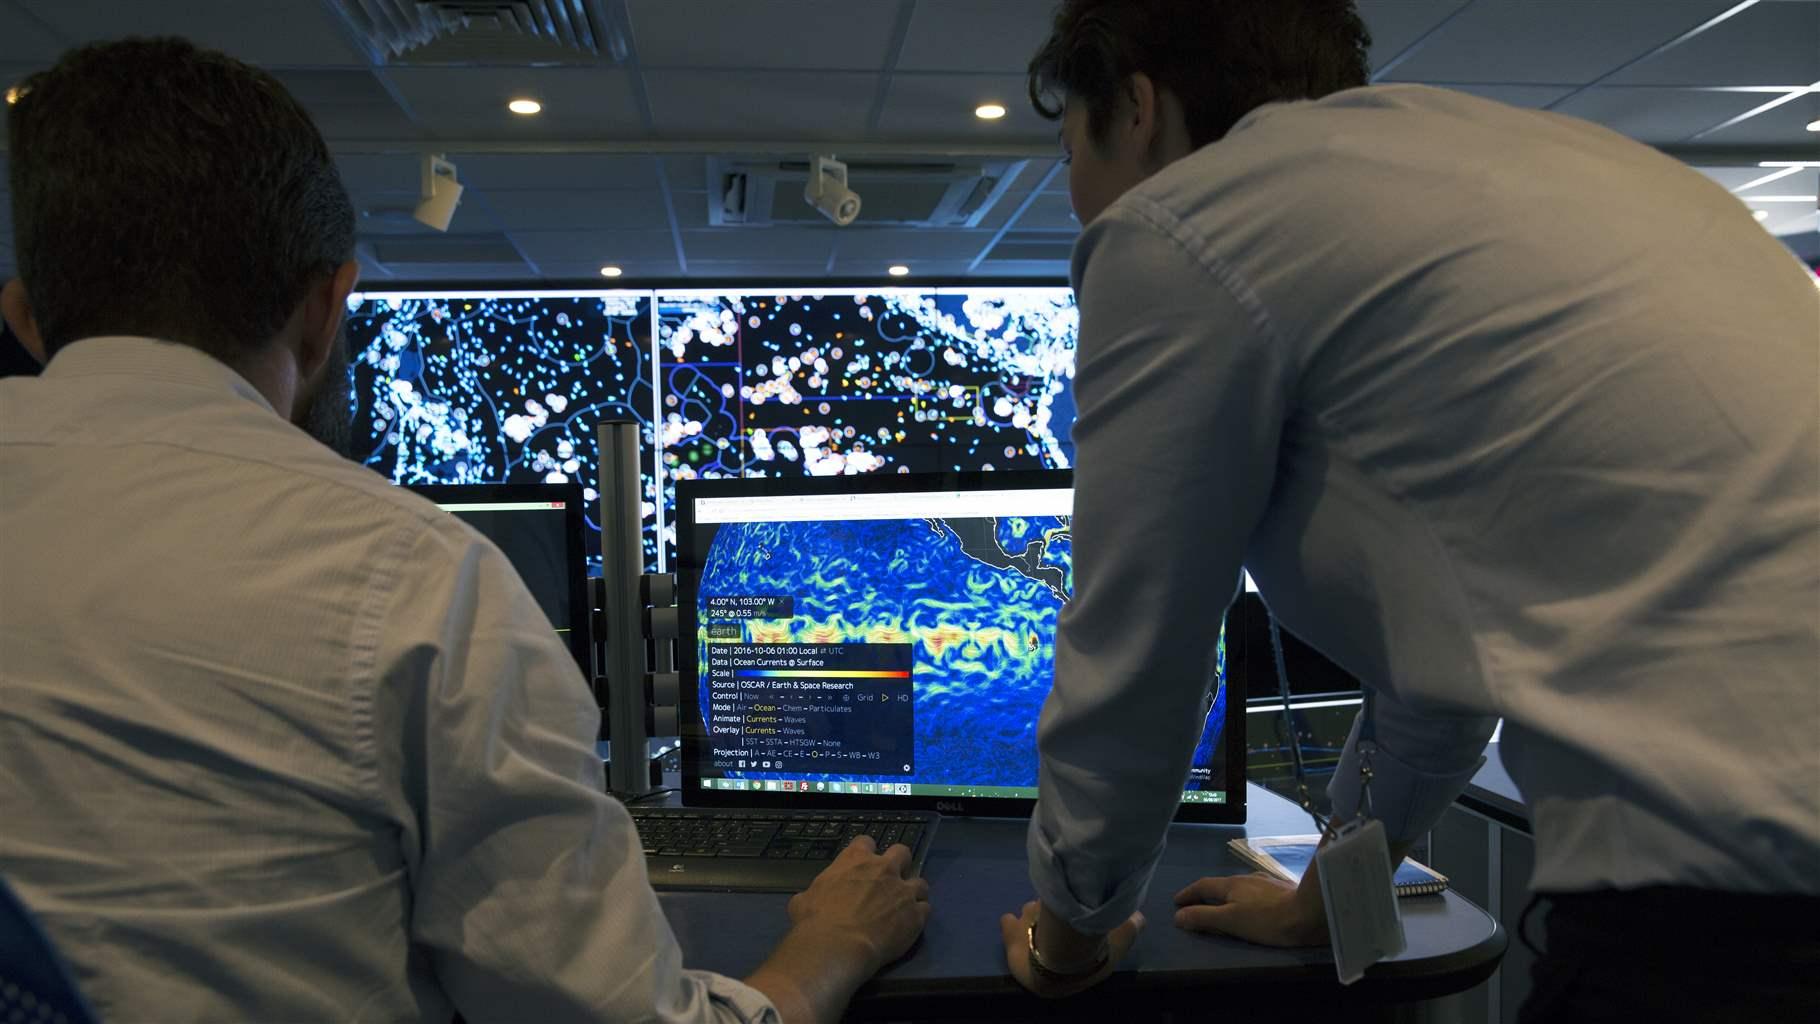 Analysts inside the Satellite Applications Catapult Operations Centre in Harwell, England where analysts from Ocean Mind work with Overseas Ocean Monitor technology to monitor fishing activities around the world.